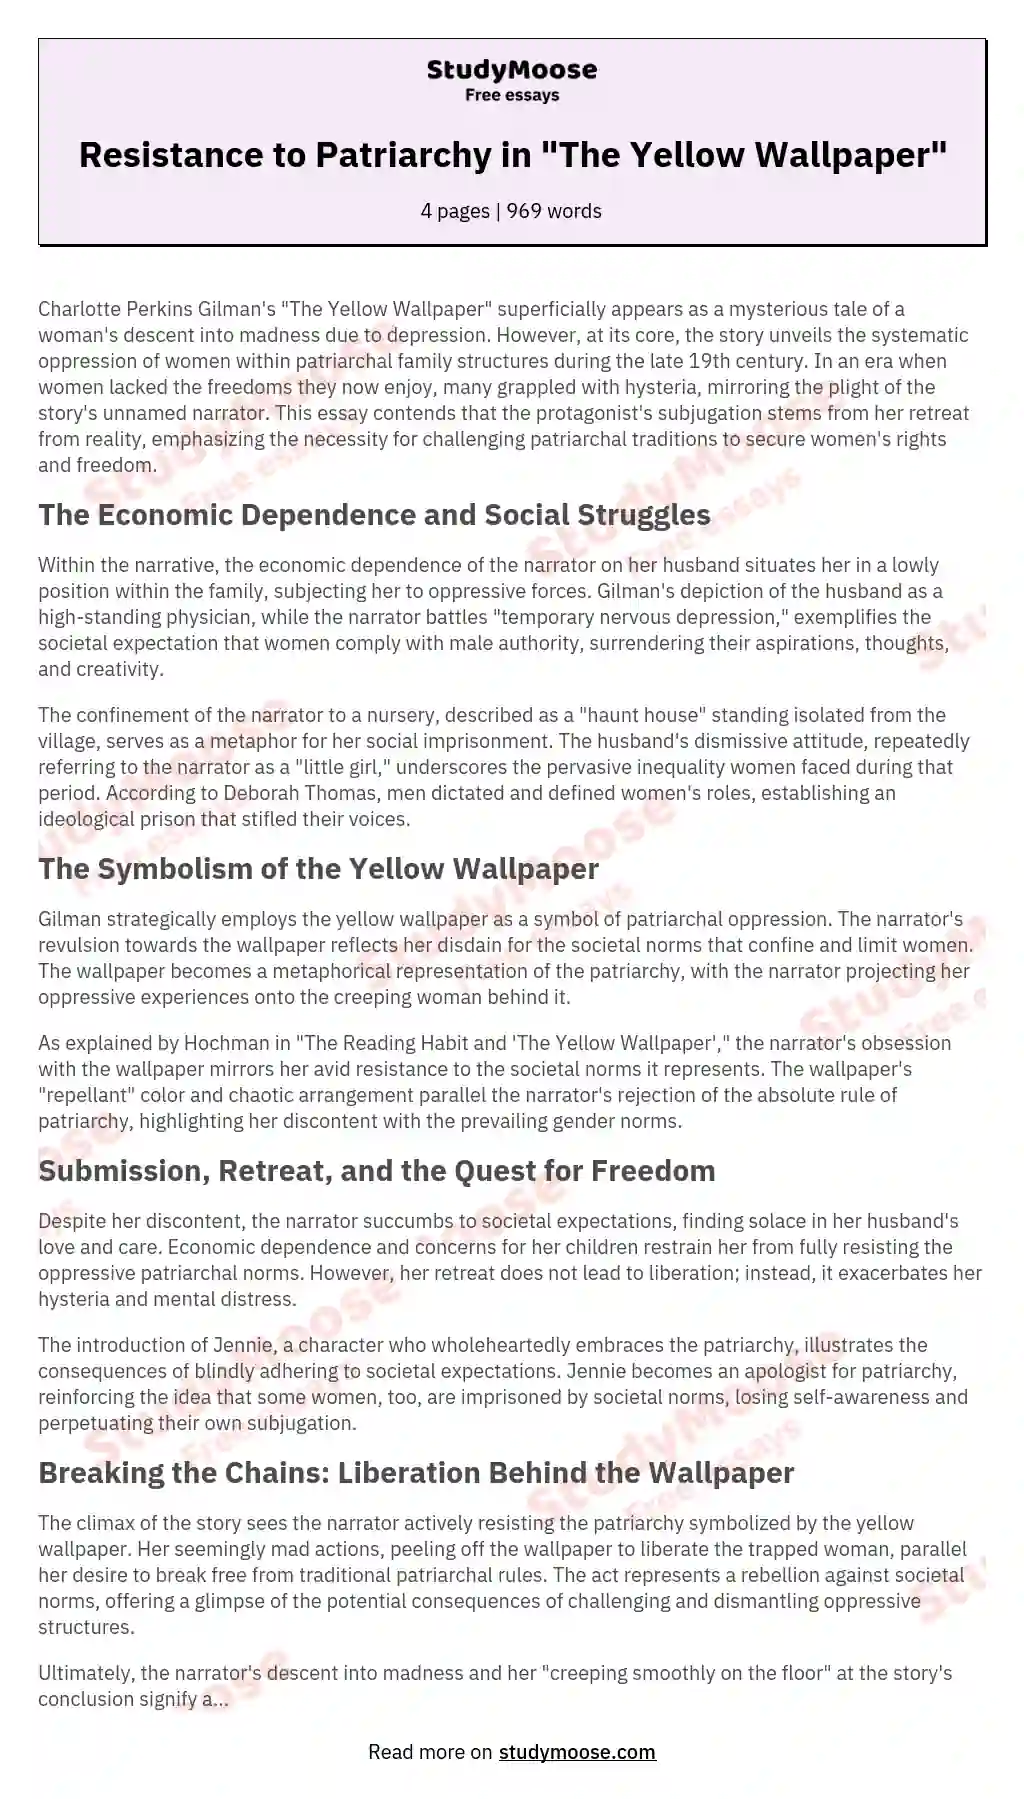 Resistance to Patriarchy in "The Yellow Wallpaper" essay